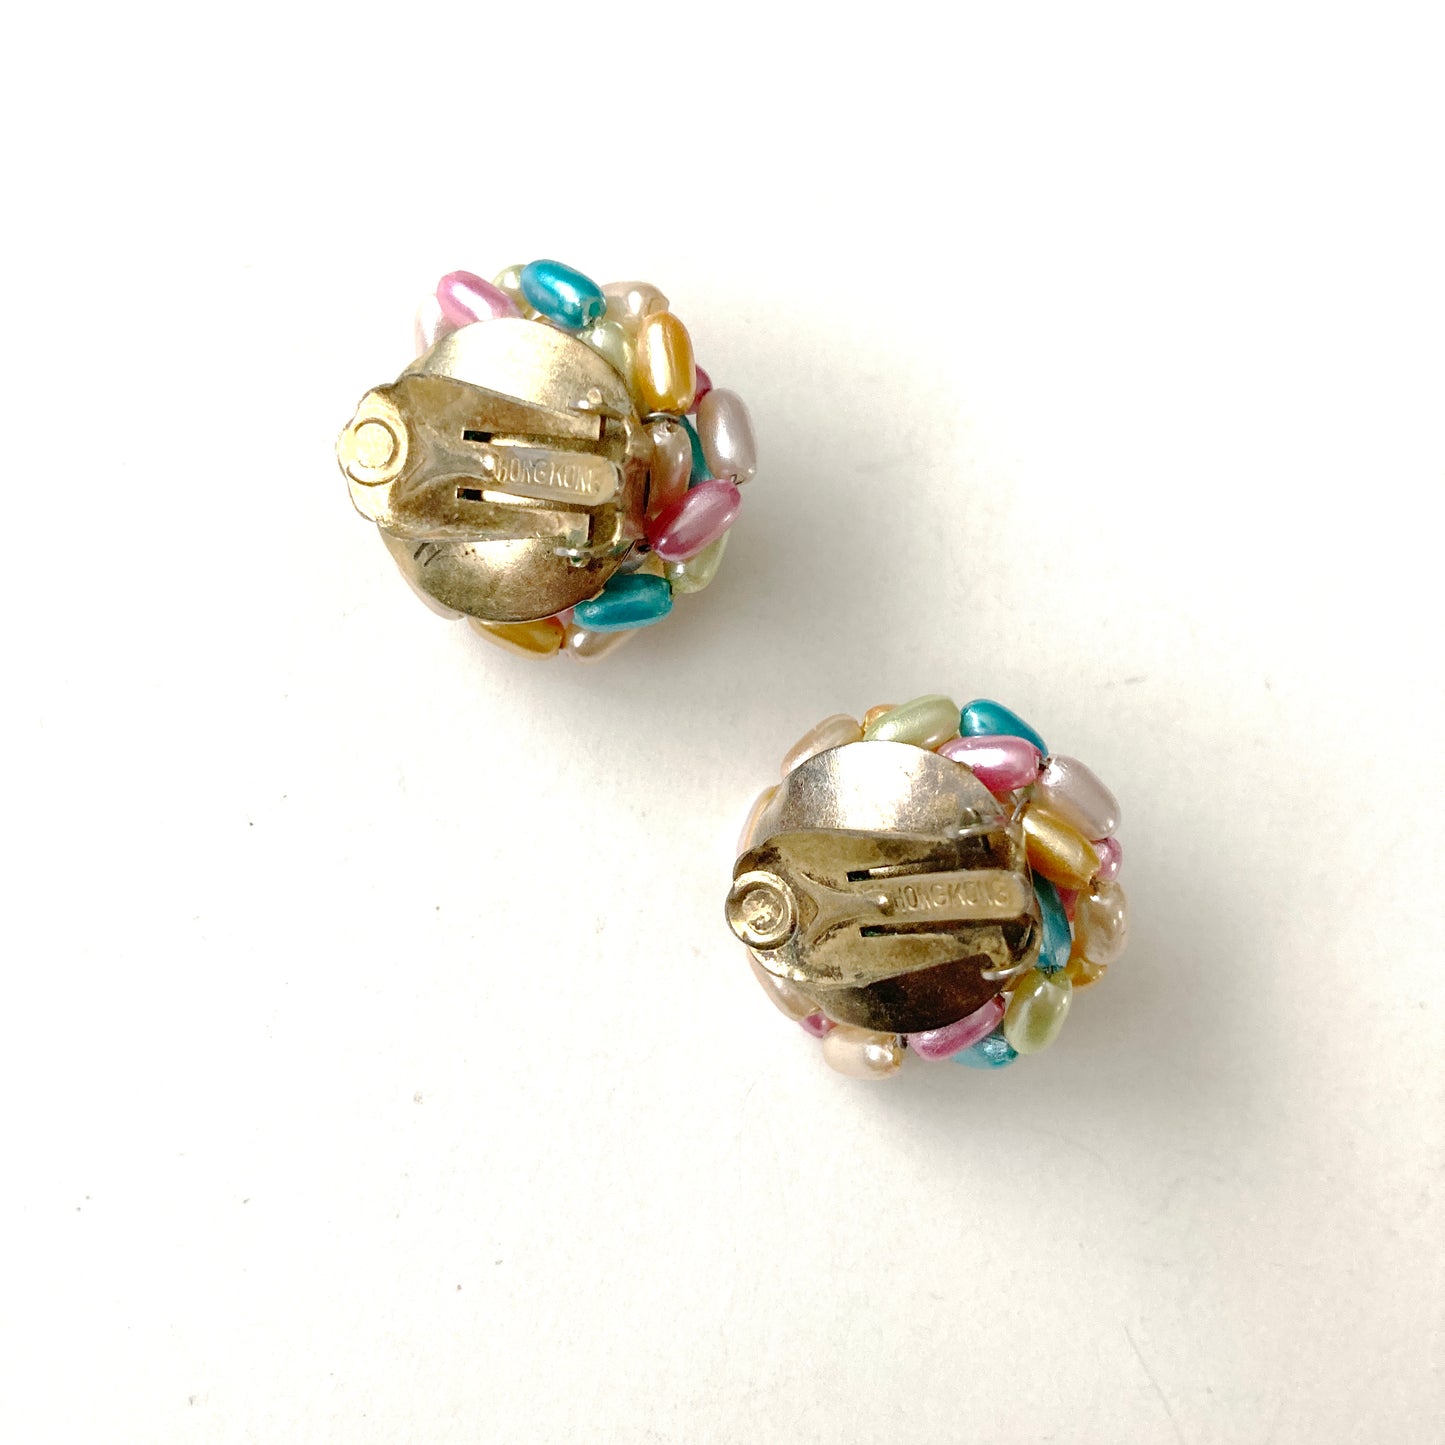 Pastel Pearlized Cluster Earrings Marked Hong Kong